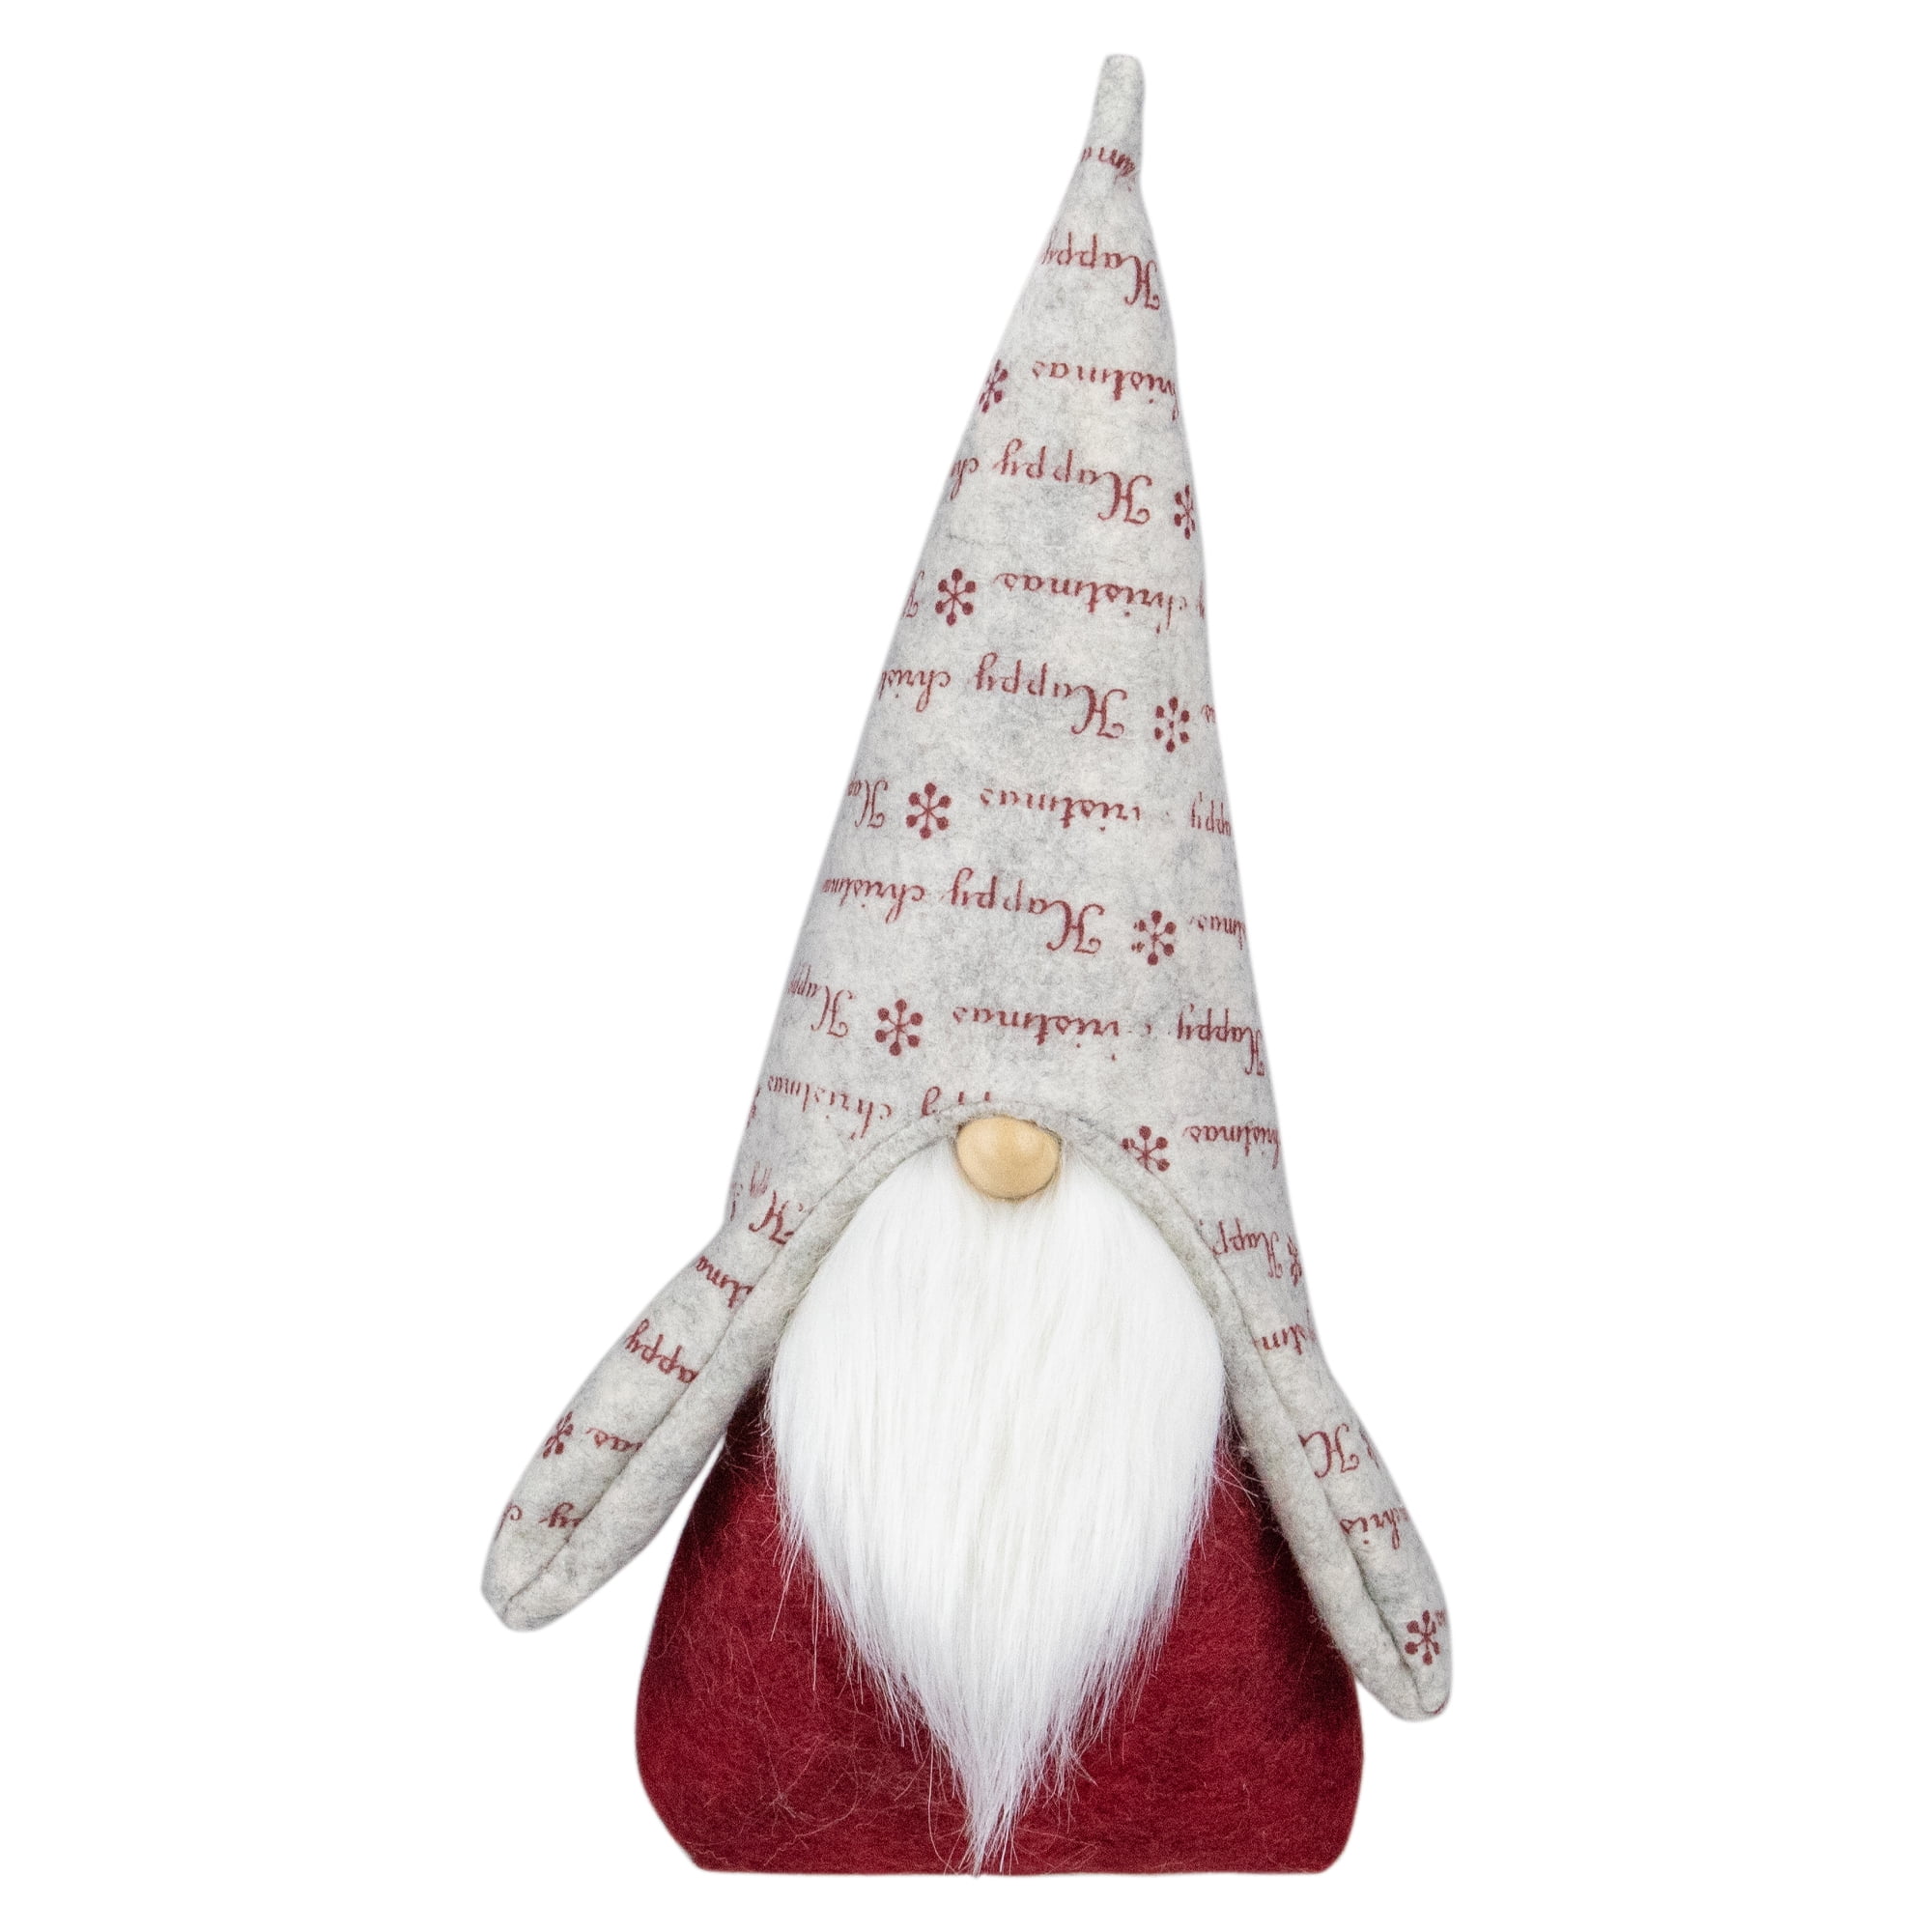 Mr.Sport Christmas Decoration Gnome Christmas Plush Ornaments Xmas Hanging Decorations Striped Hat Tied Beard Hanging Legs